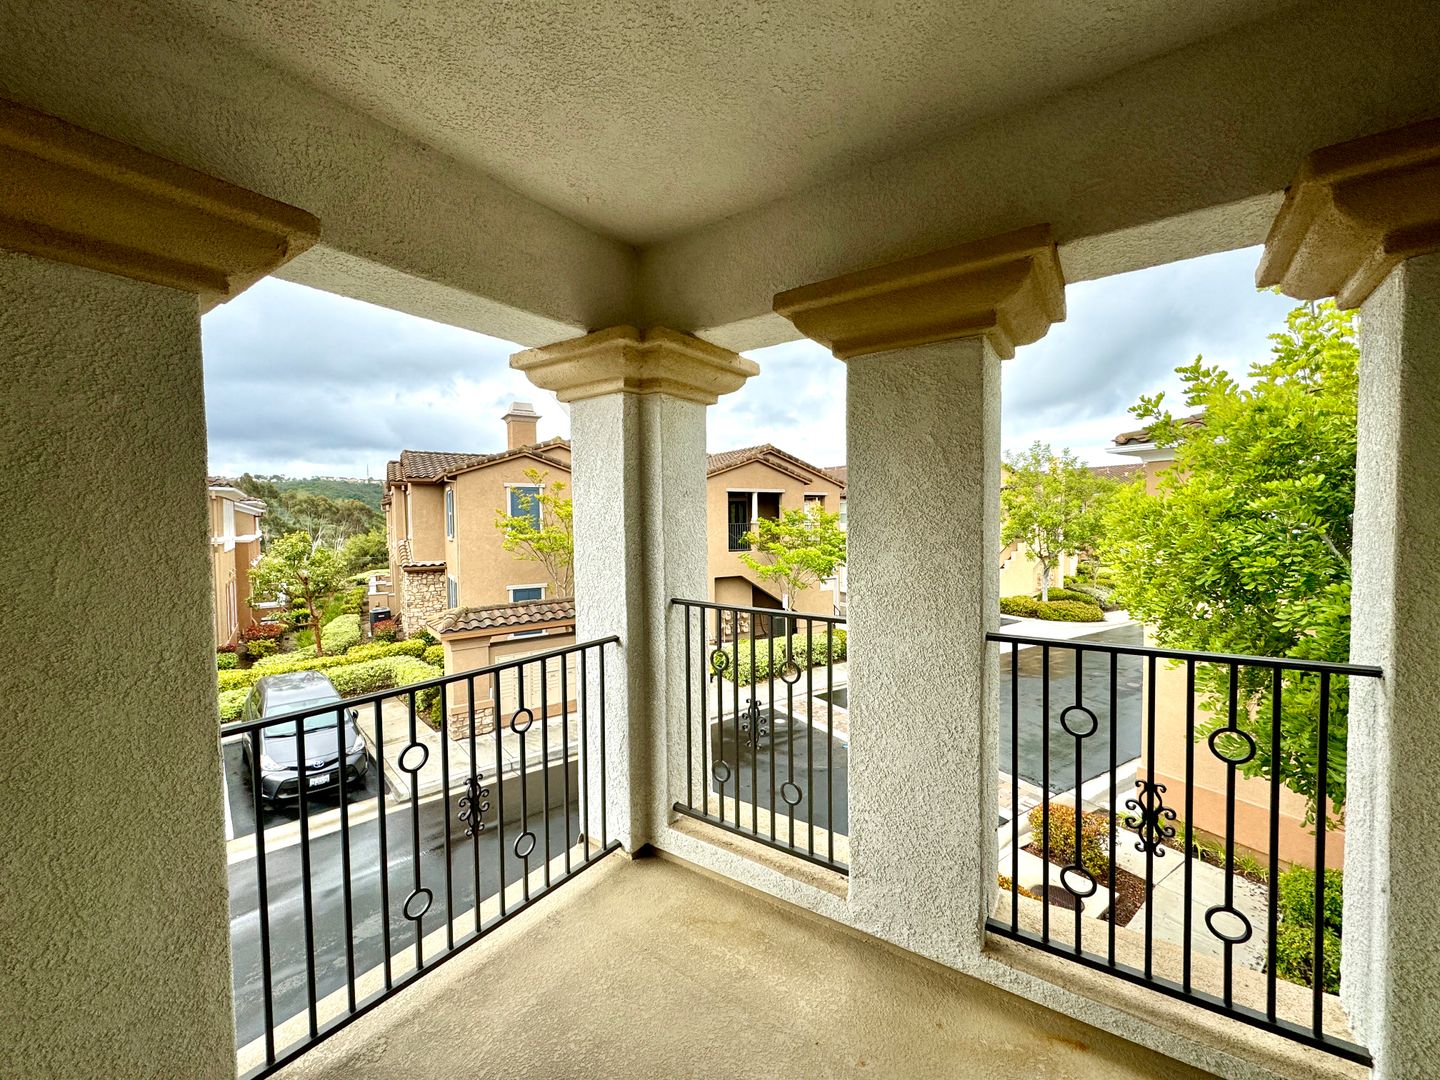 Great 2B/2BA Condo w/ Washer/Dryer, Pool & Upgrades Throughout!